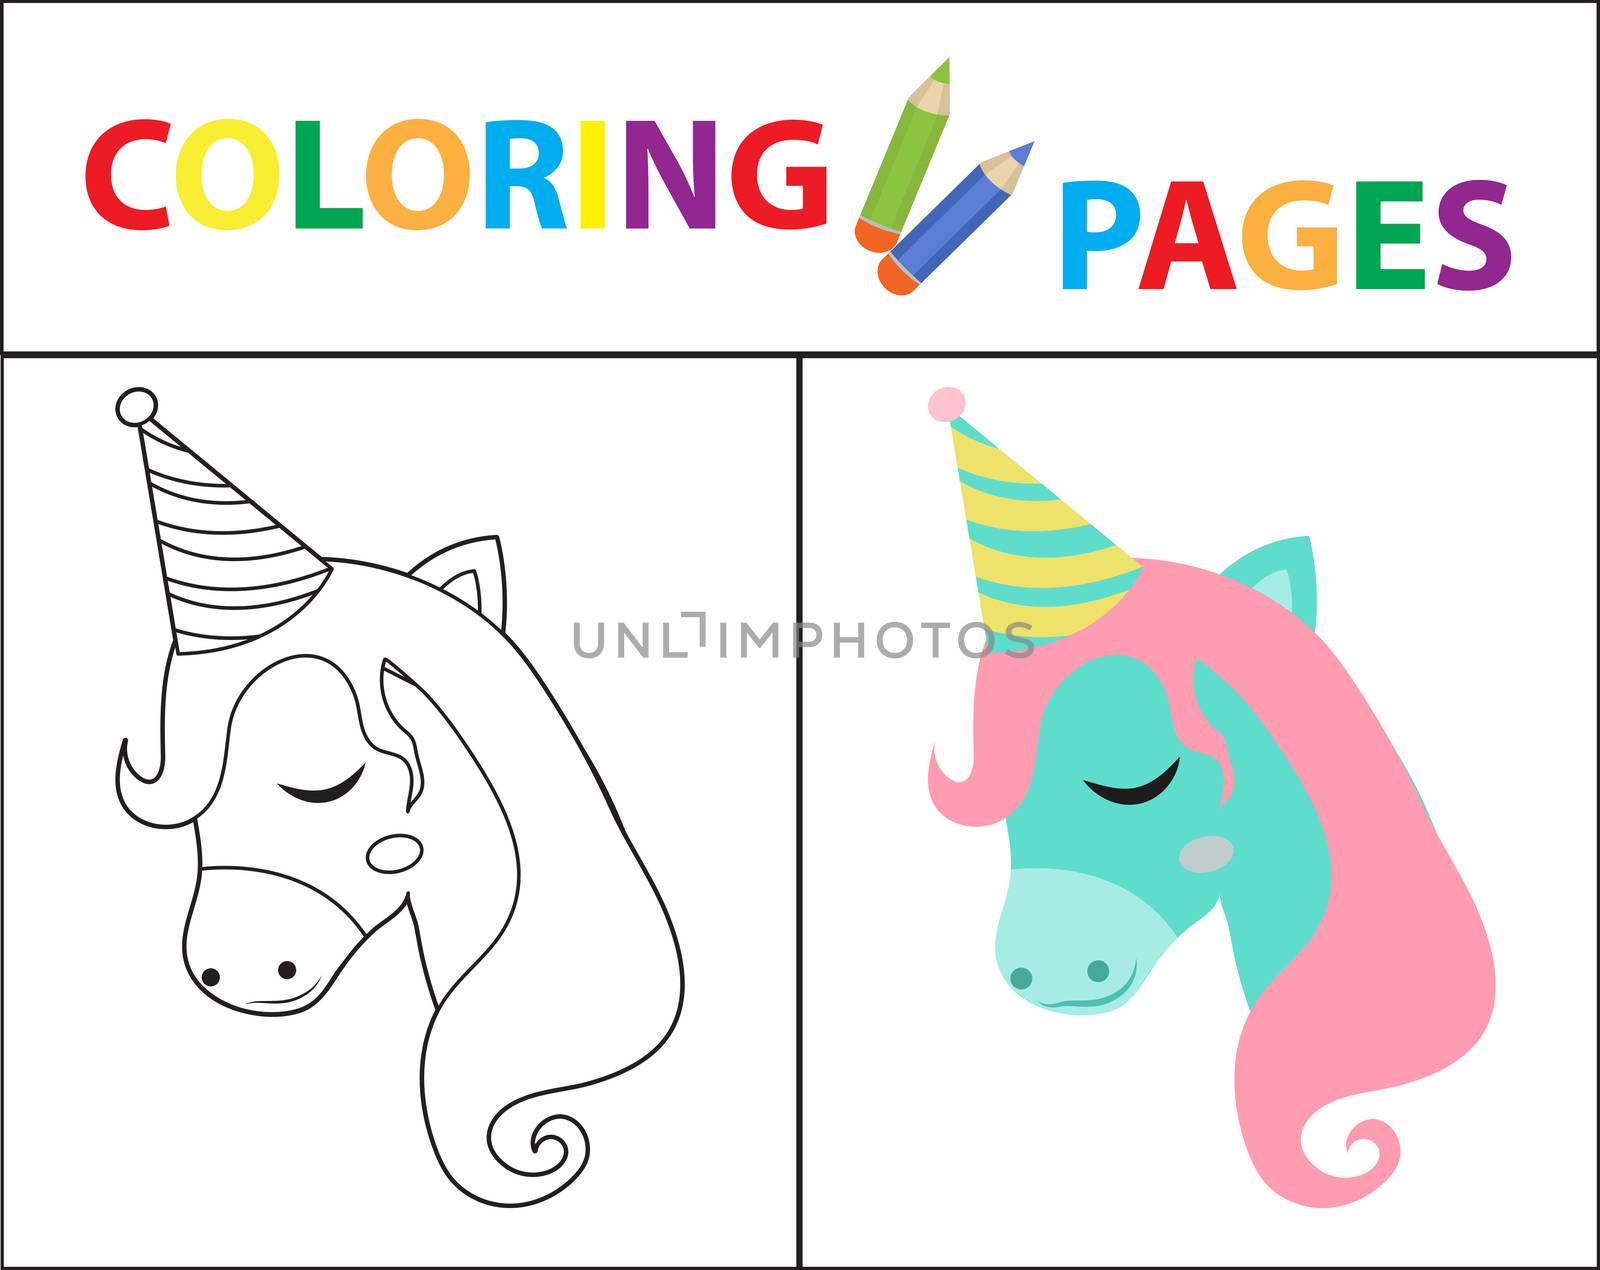 Coloring book page for kids. Birthday unicorn. Sketch outline and color version. Childrens education. illustration. by lucia_fox